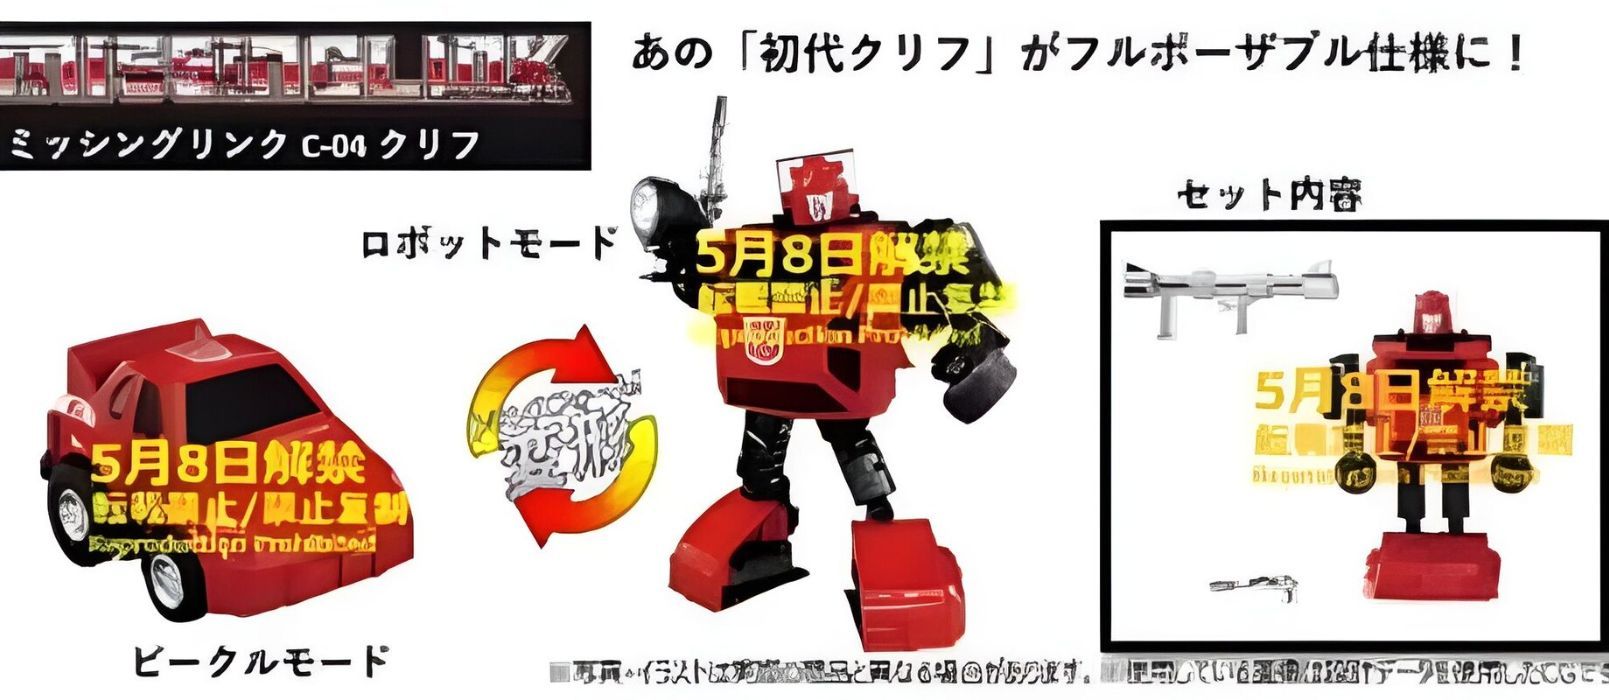 Transformers Missing Link Toyline Adds G1 Bumblebee and Cliffjumper